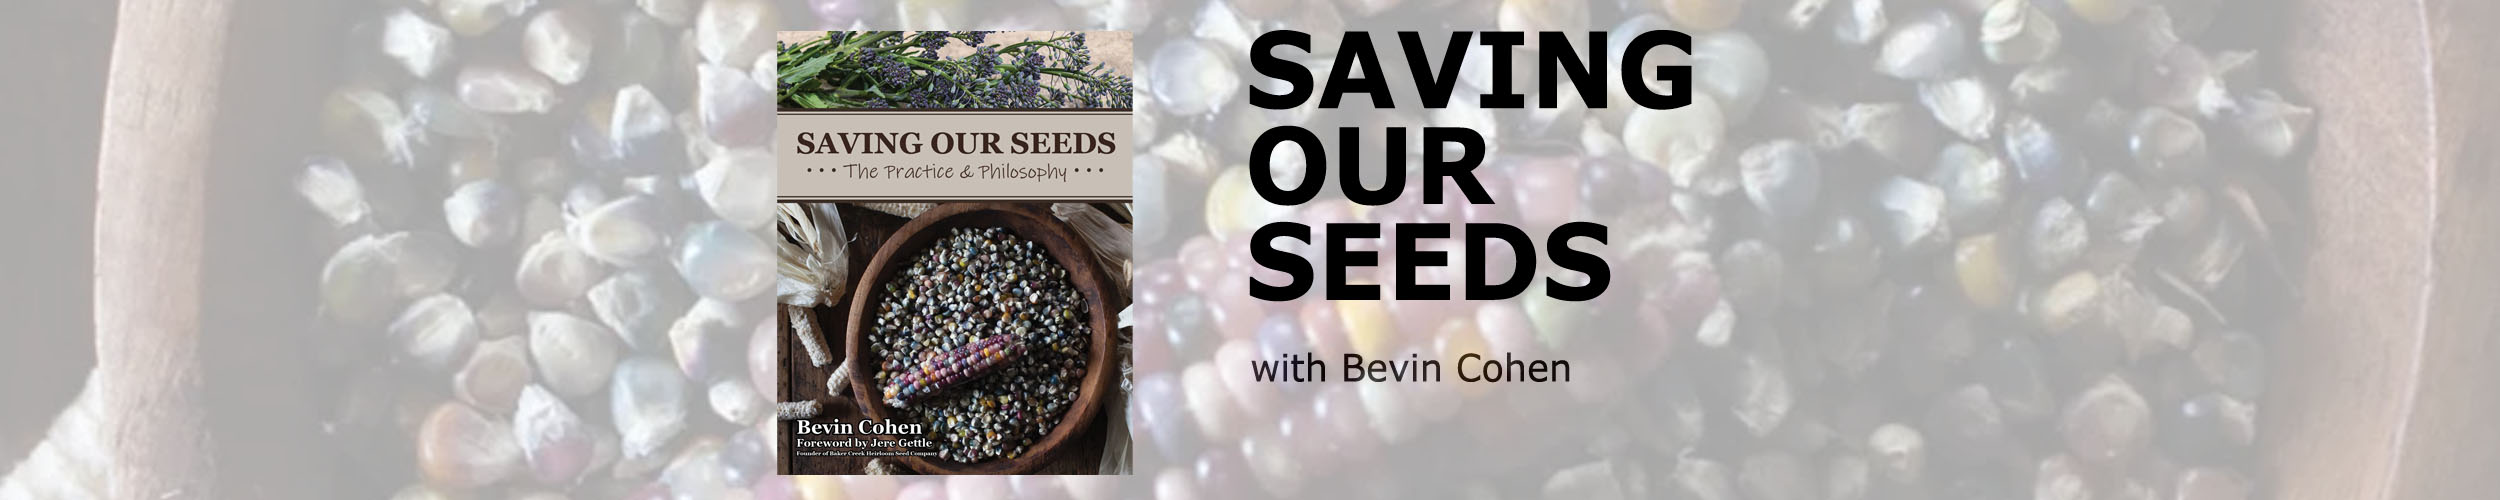 Image of "Saving our Seeds"